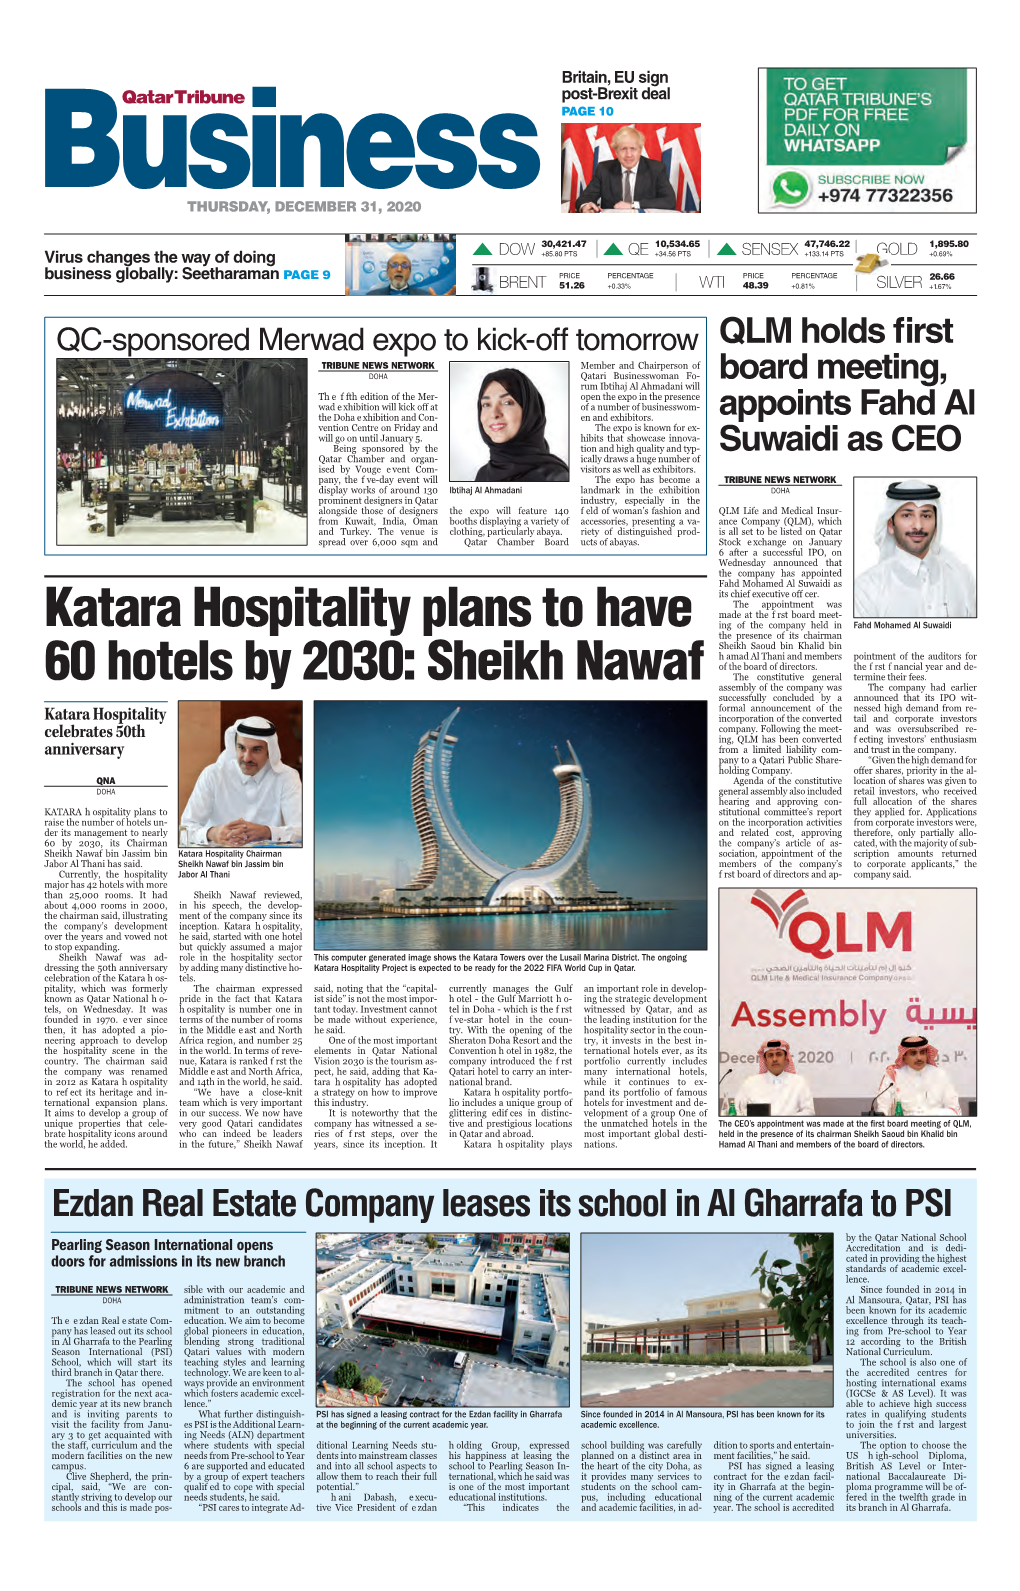 Katara Hospitality Plans to Have 60 Hotels by 2030